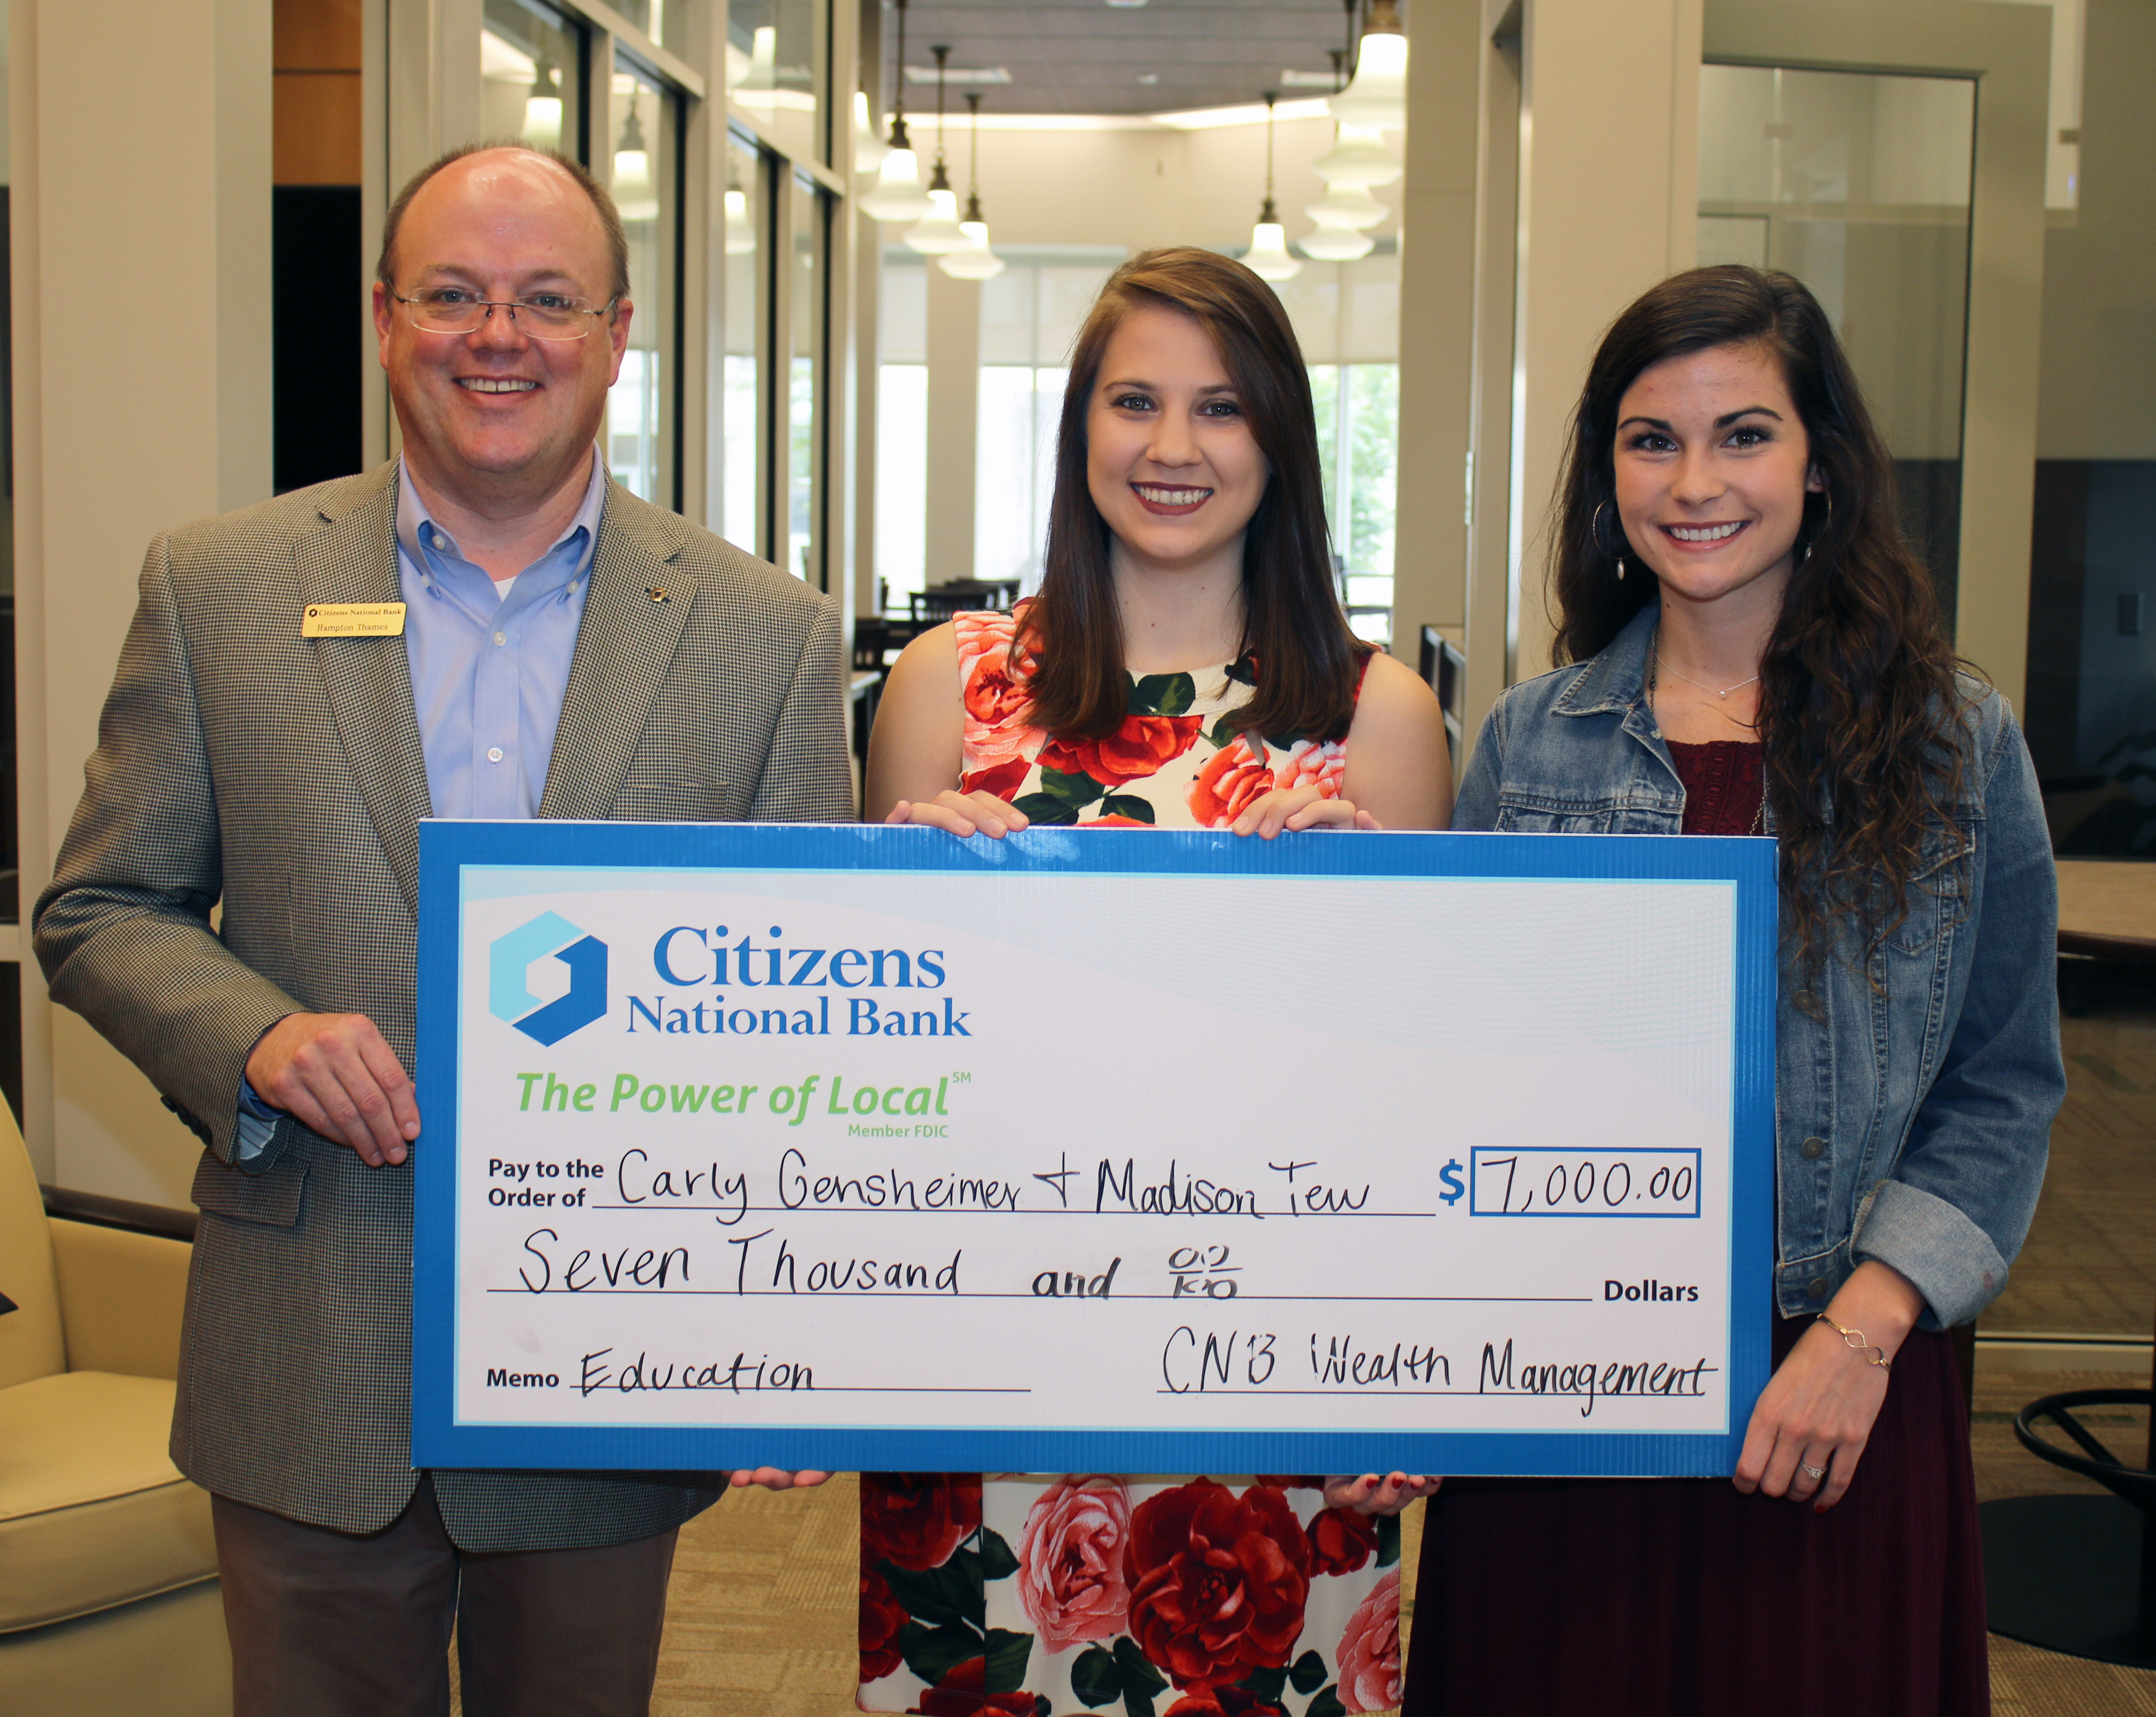 President of Citizens National Bank, Hampton Thames; MSU-Meridian students Carly Gensheimer (middle), a communication major from Union, and Madison Tew, an elementary education major from Meridian. (Photo by Lisa Sollie)